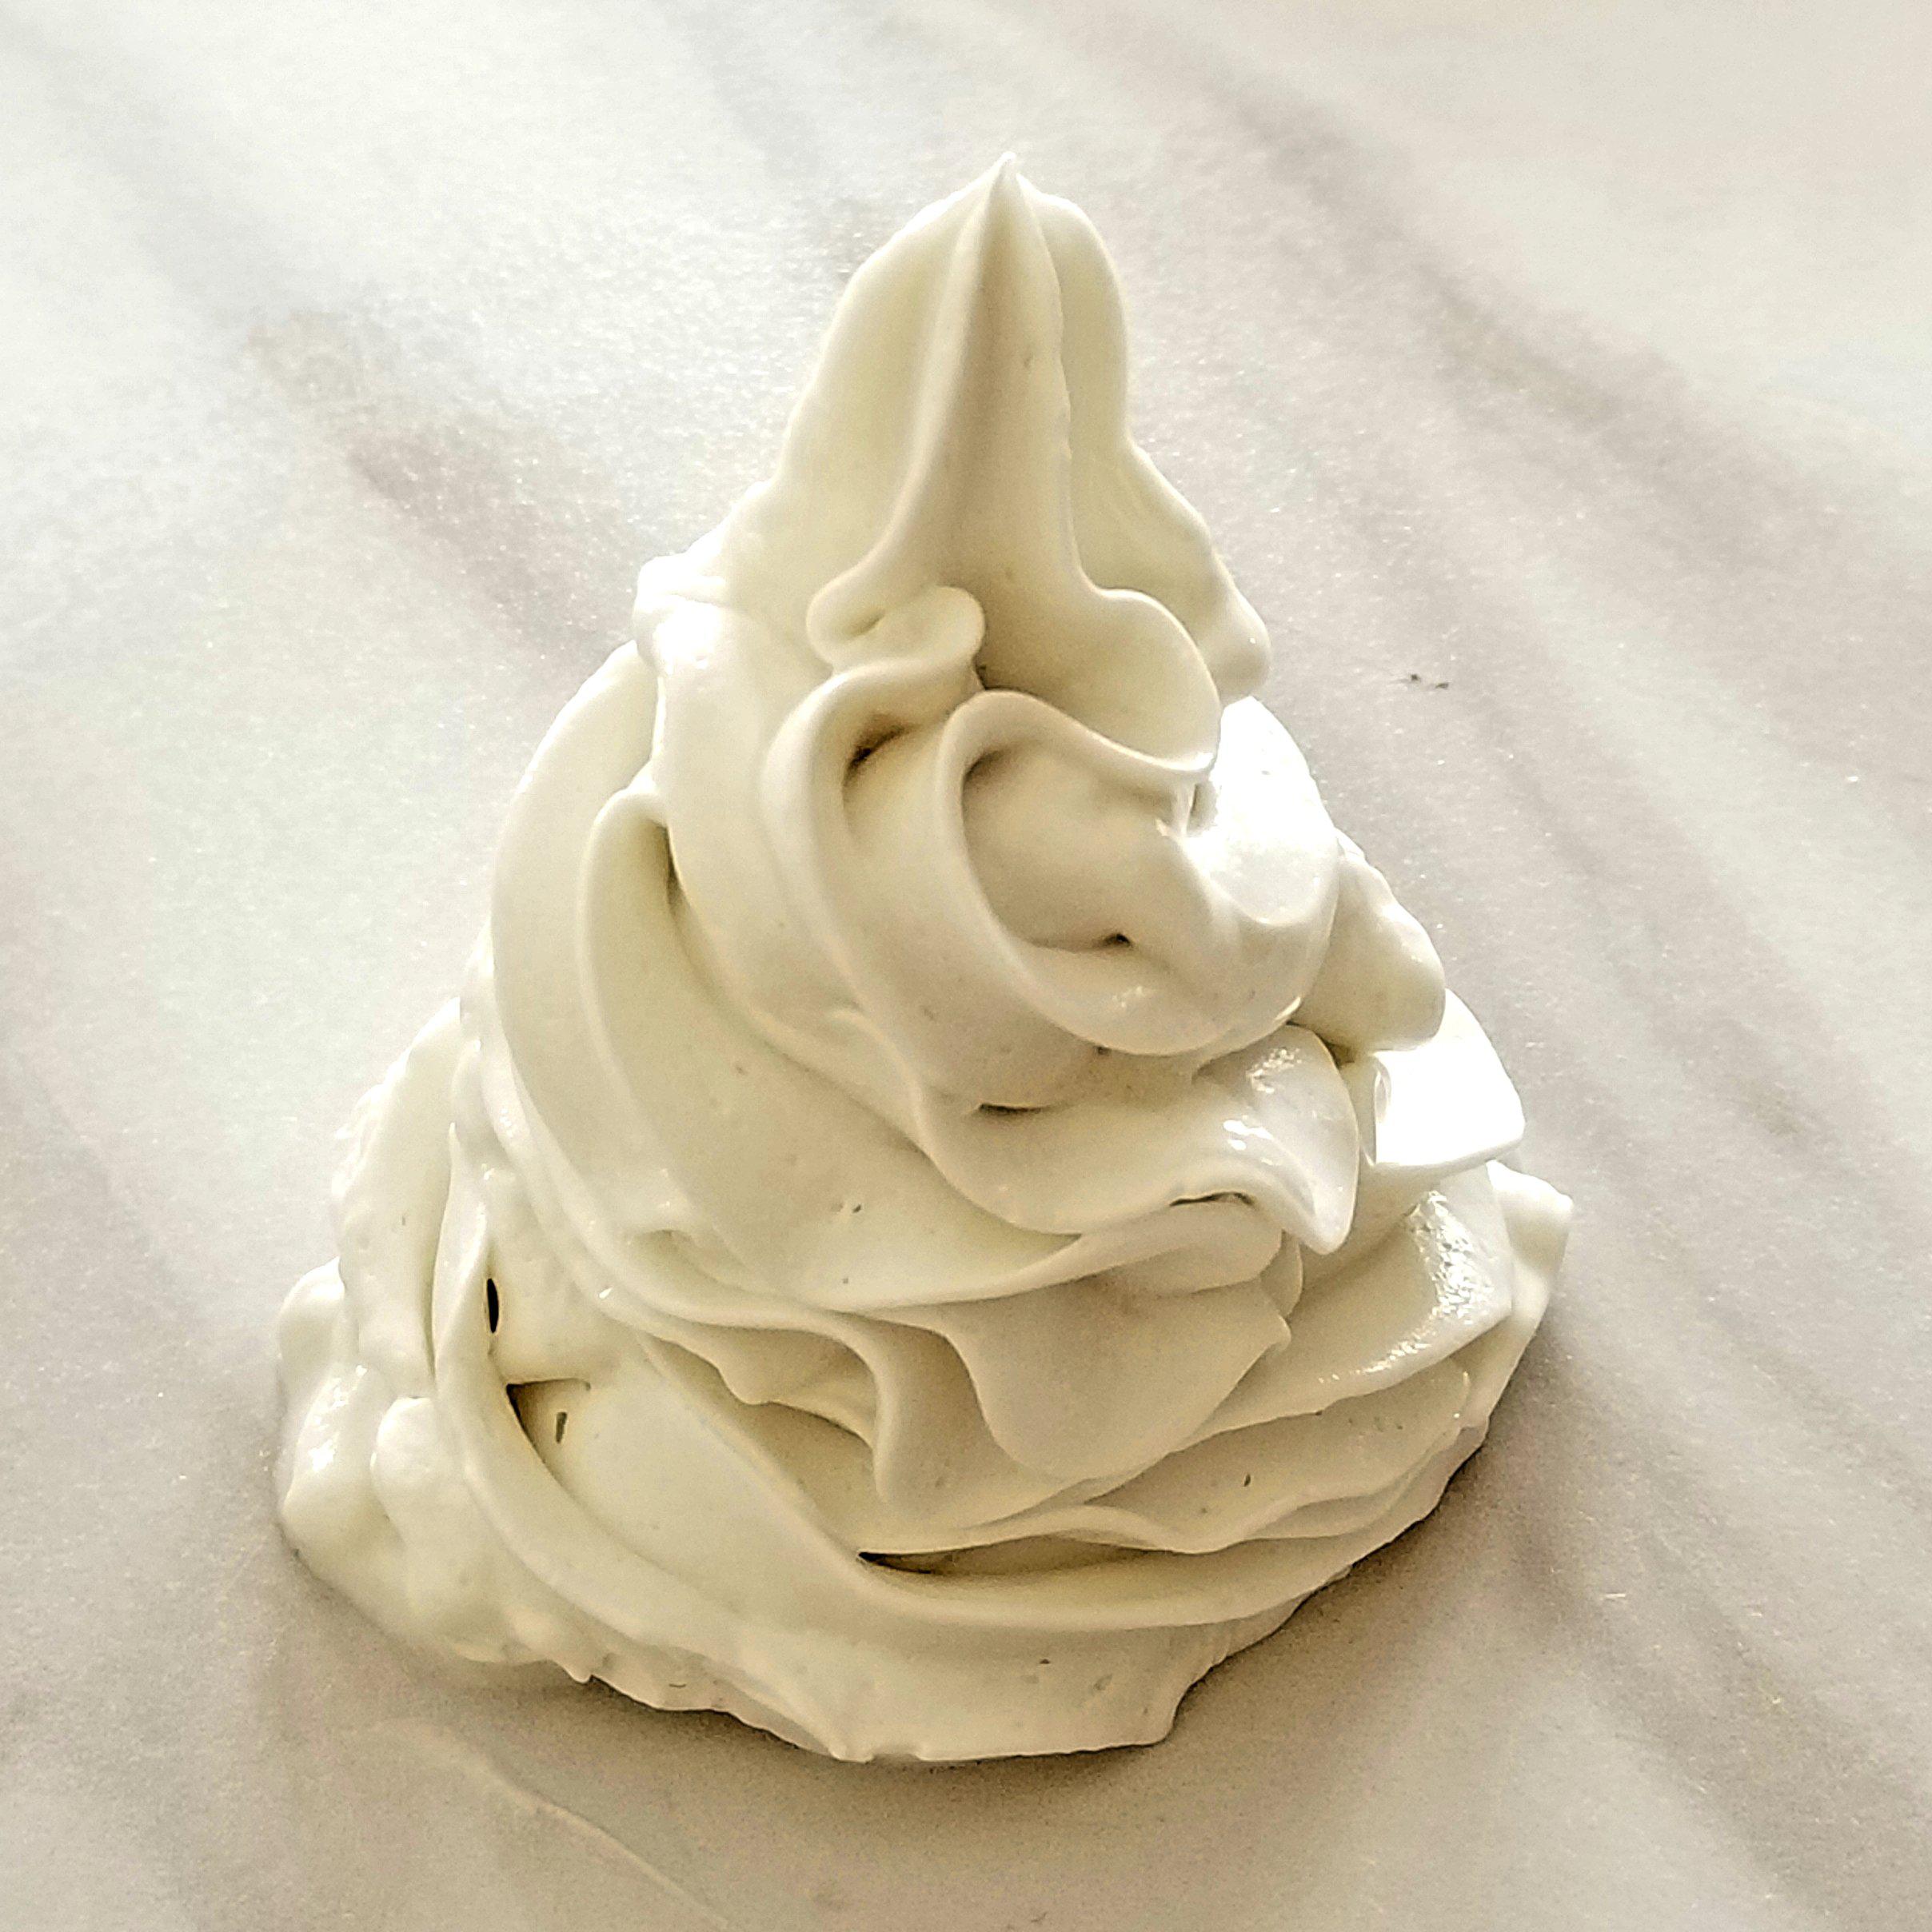 Acqua Whipped Butter